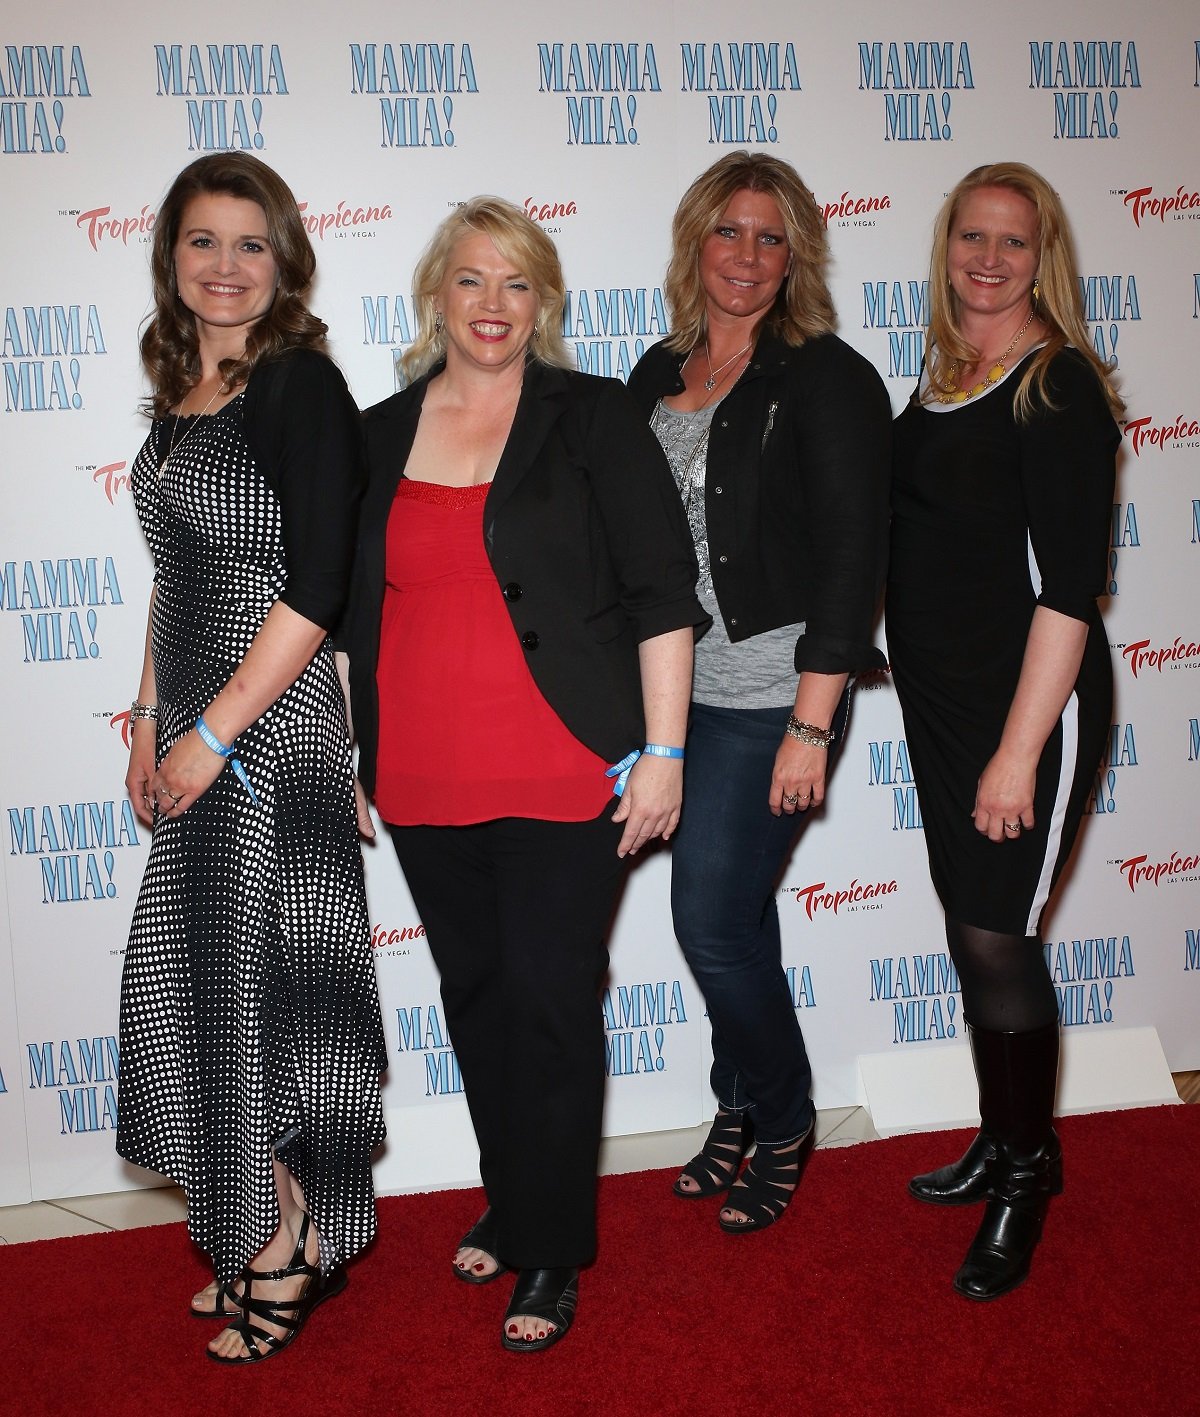 obyn Brown, Janelle Brown Meri Brown and Christine Brown from "Sister Wives" arrive at the grand opening of the show "Mamma Mia!" at the New Tropicana Las Vegas on May 16, 2014 in Las Vegas, Nevada